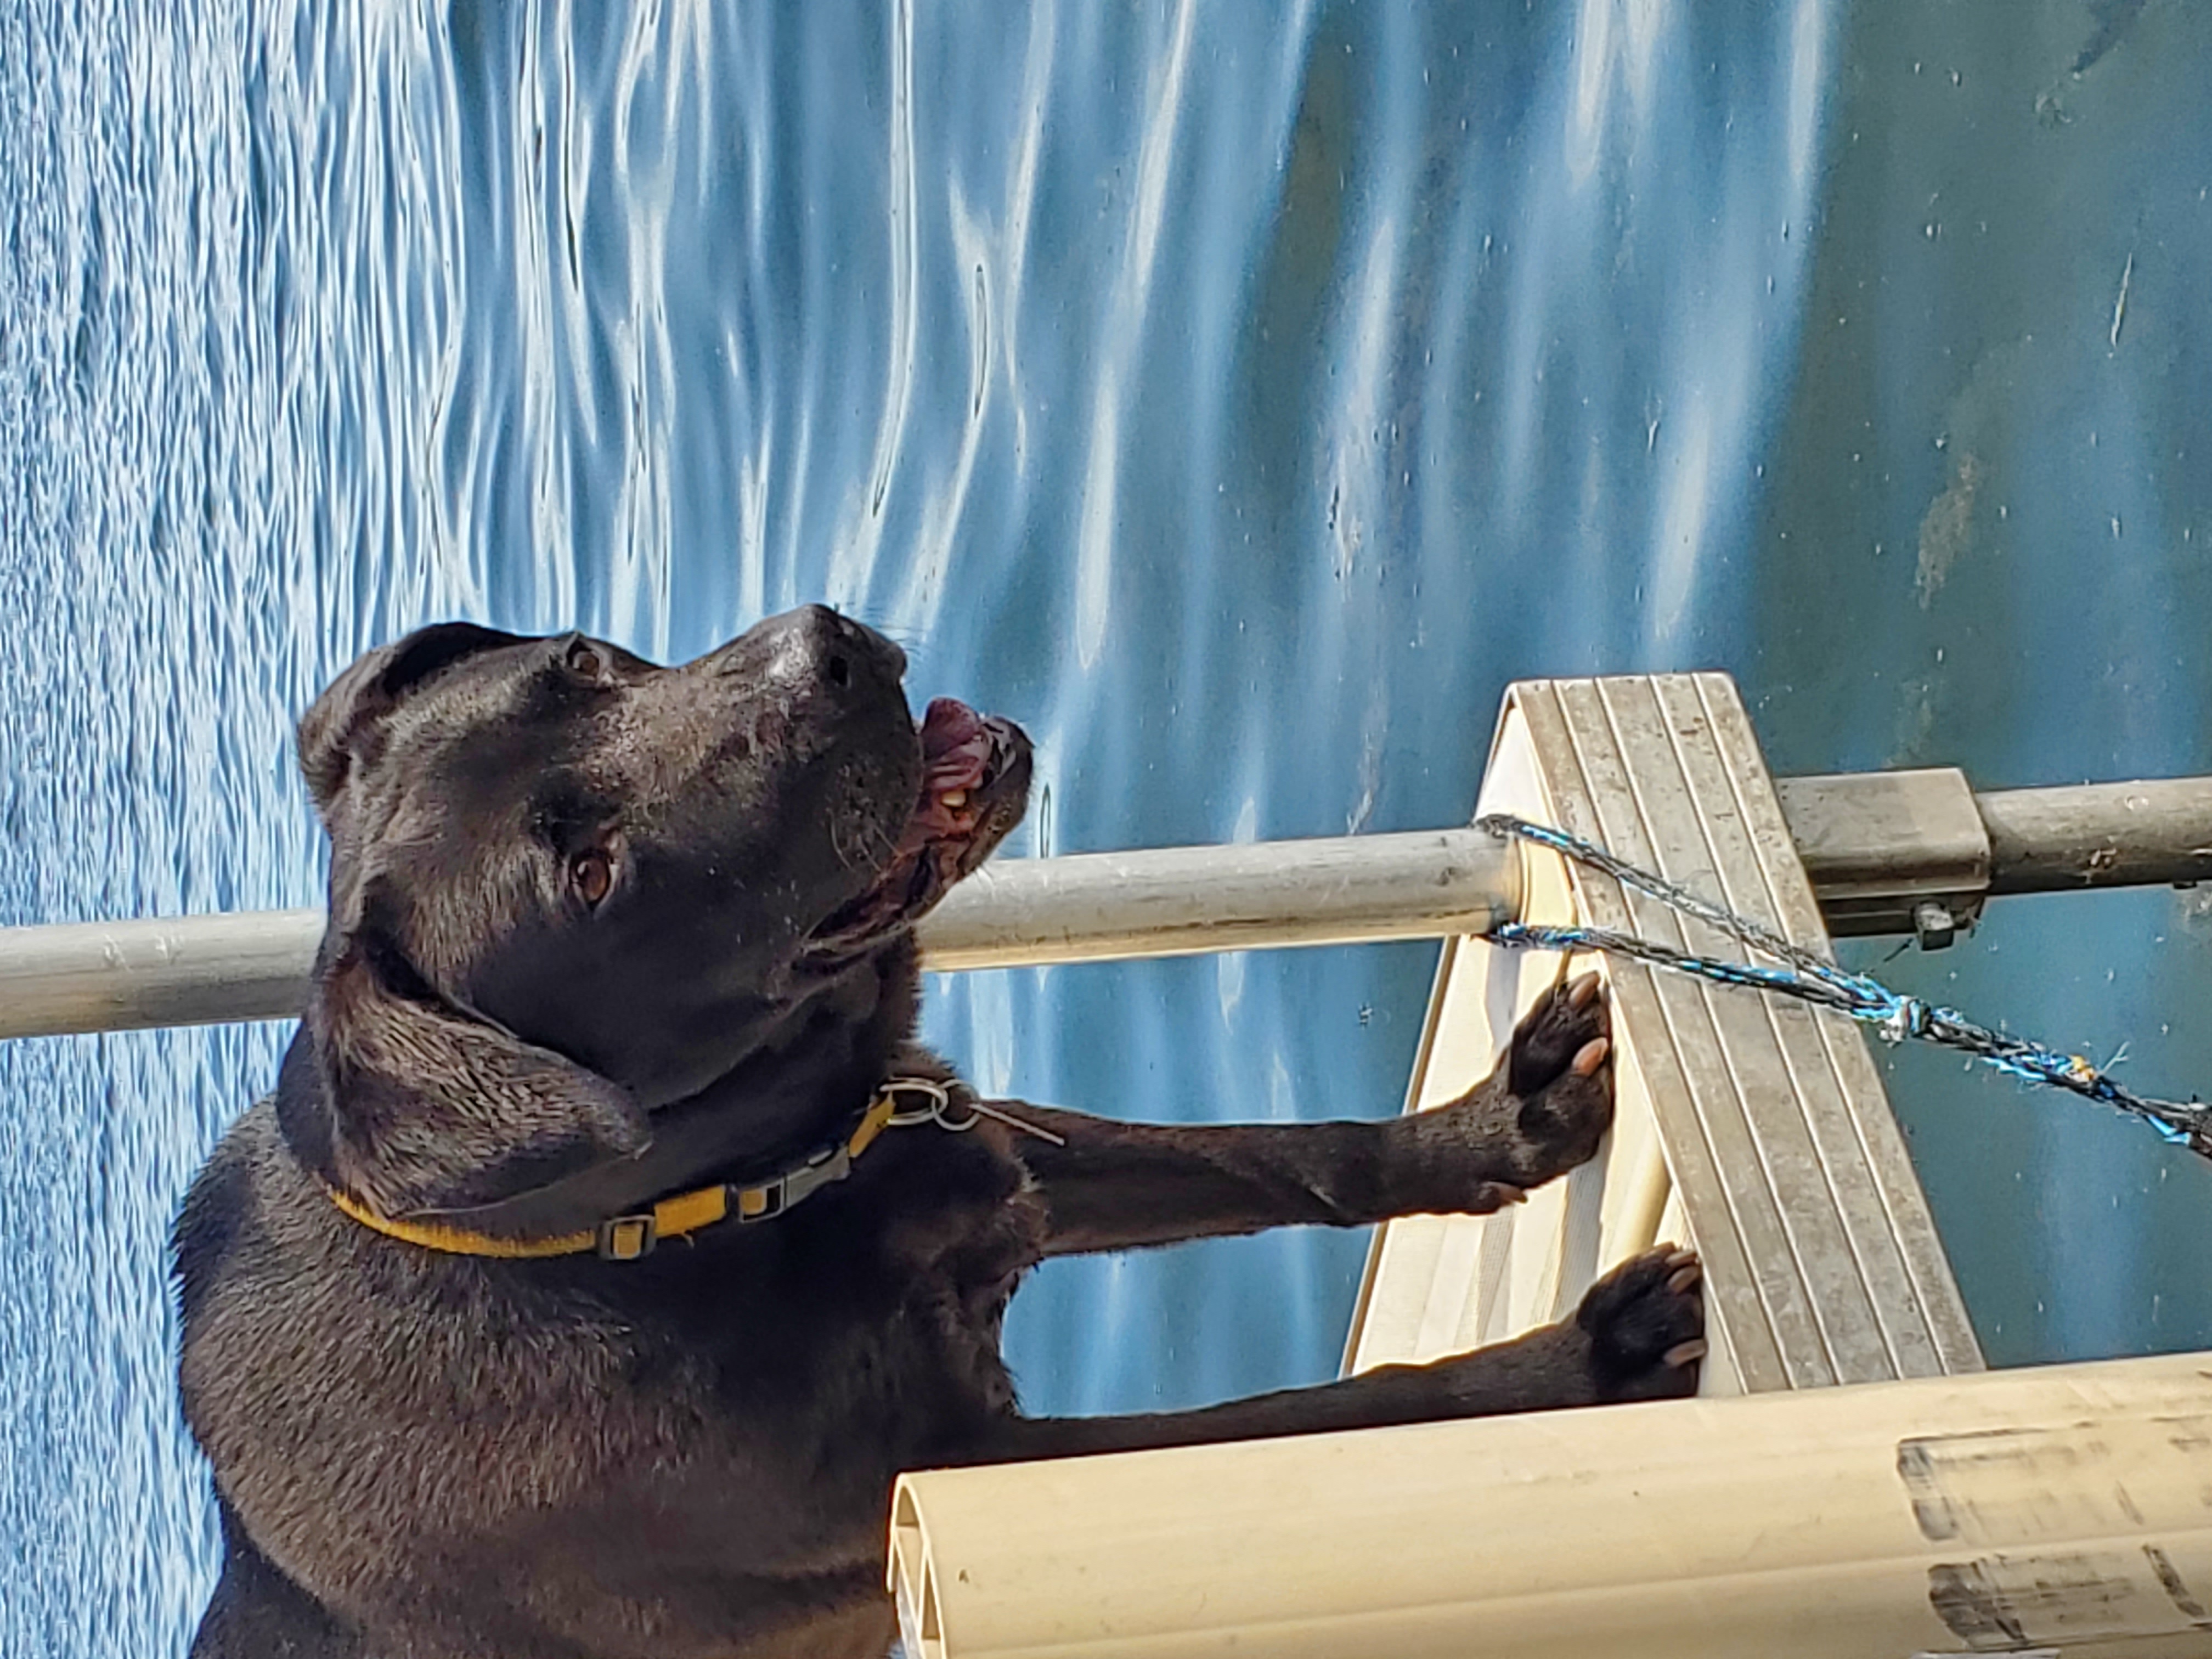 Scout, a black lab-pit mix stands at the edge of a dock smiling and looking out over a lake.